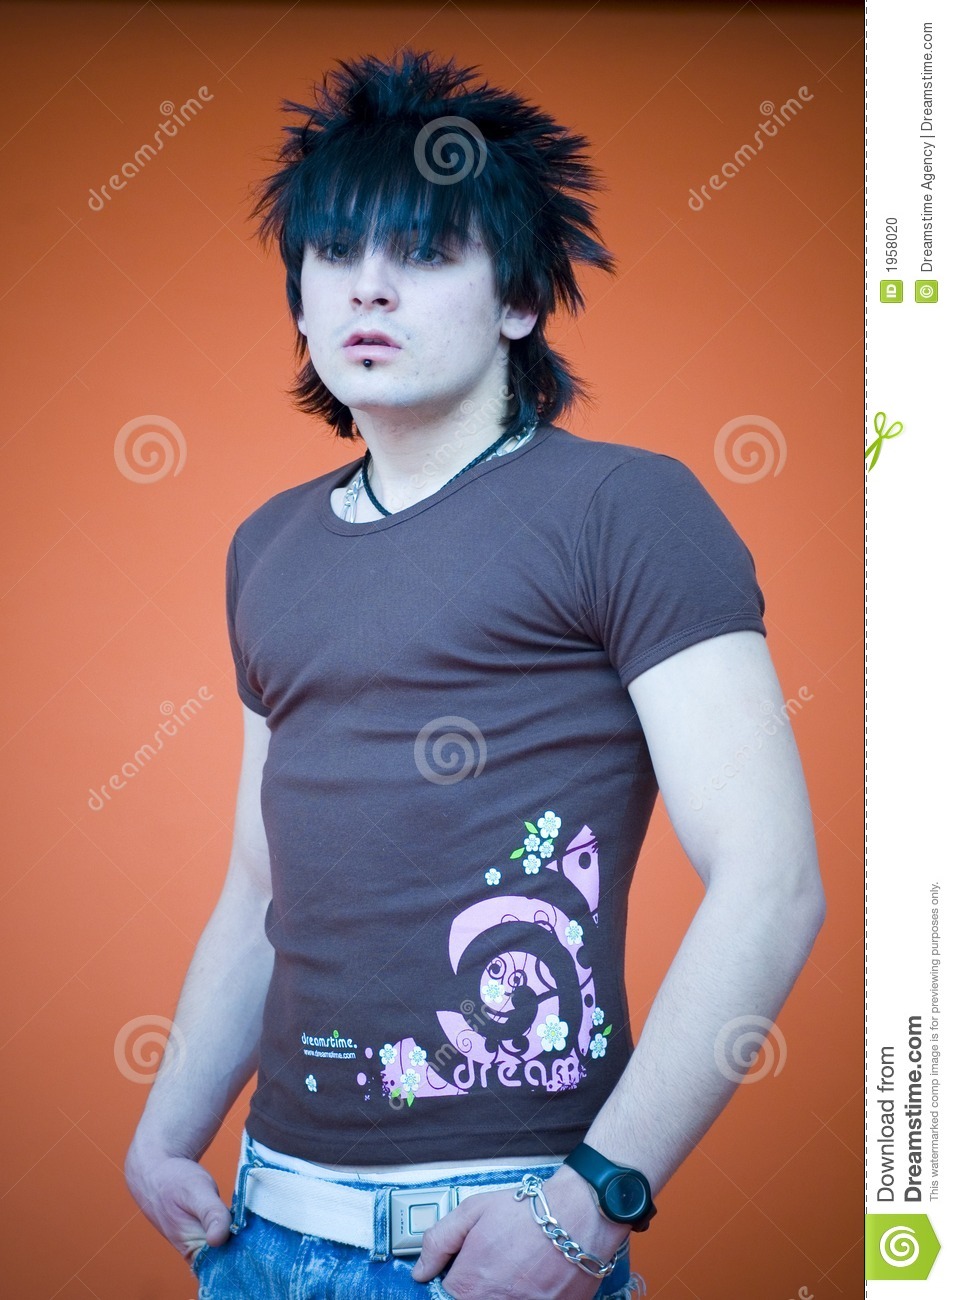 Young Man With Dreamstime Shirt And Spiky Hair Standing With Hands In    